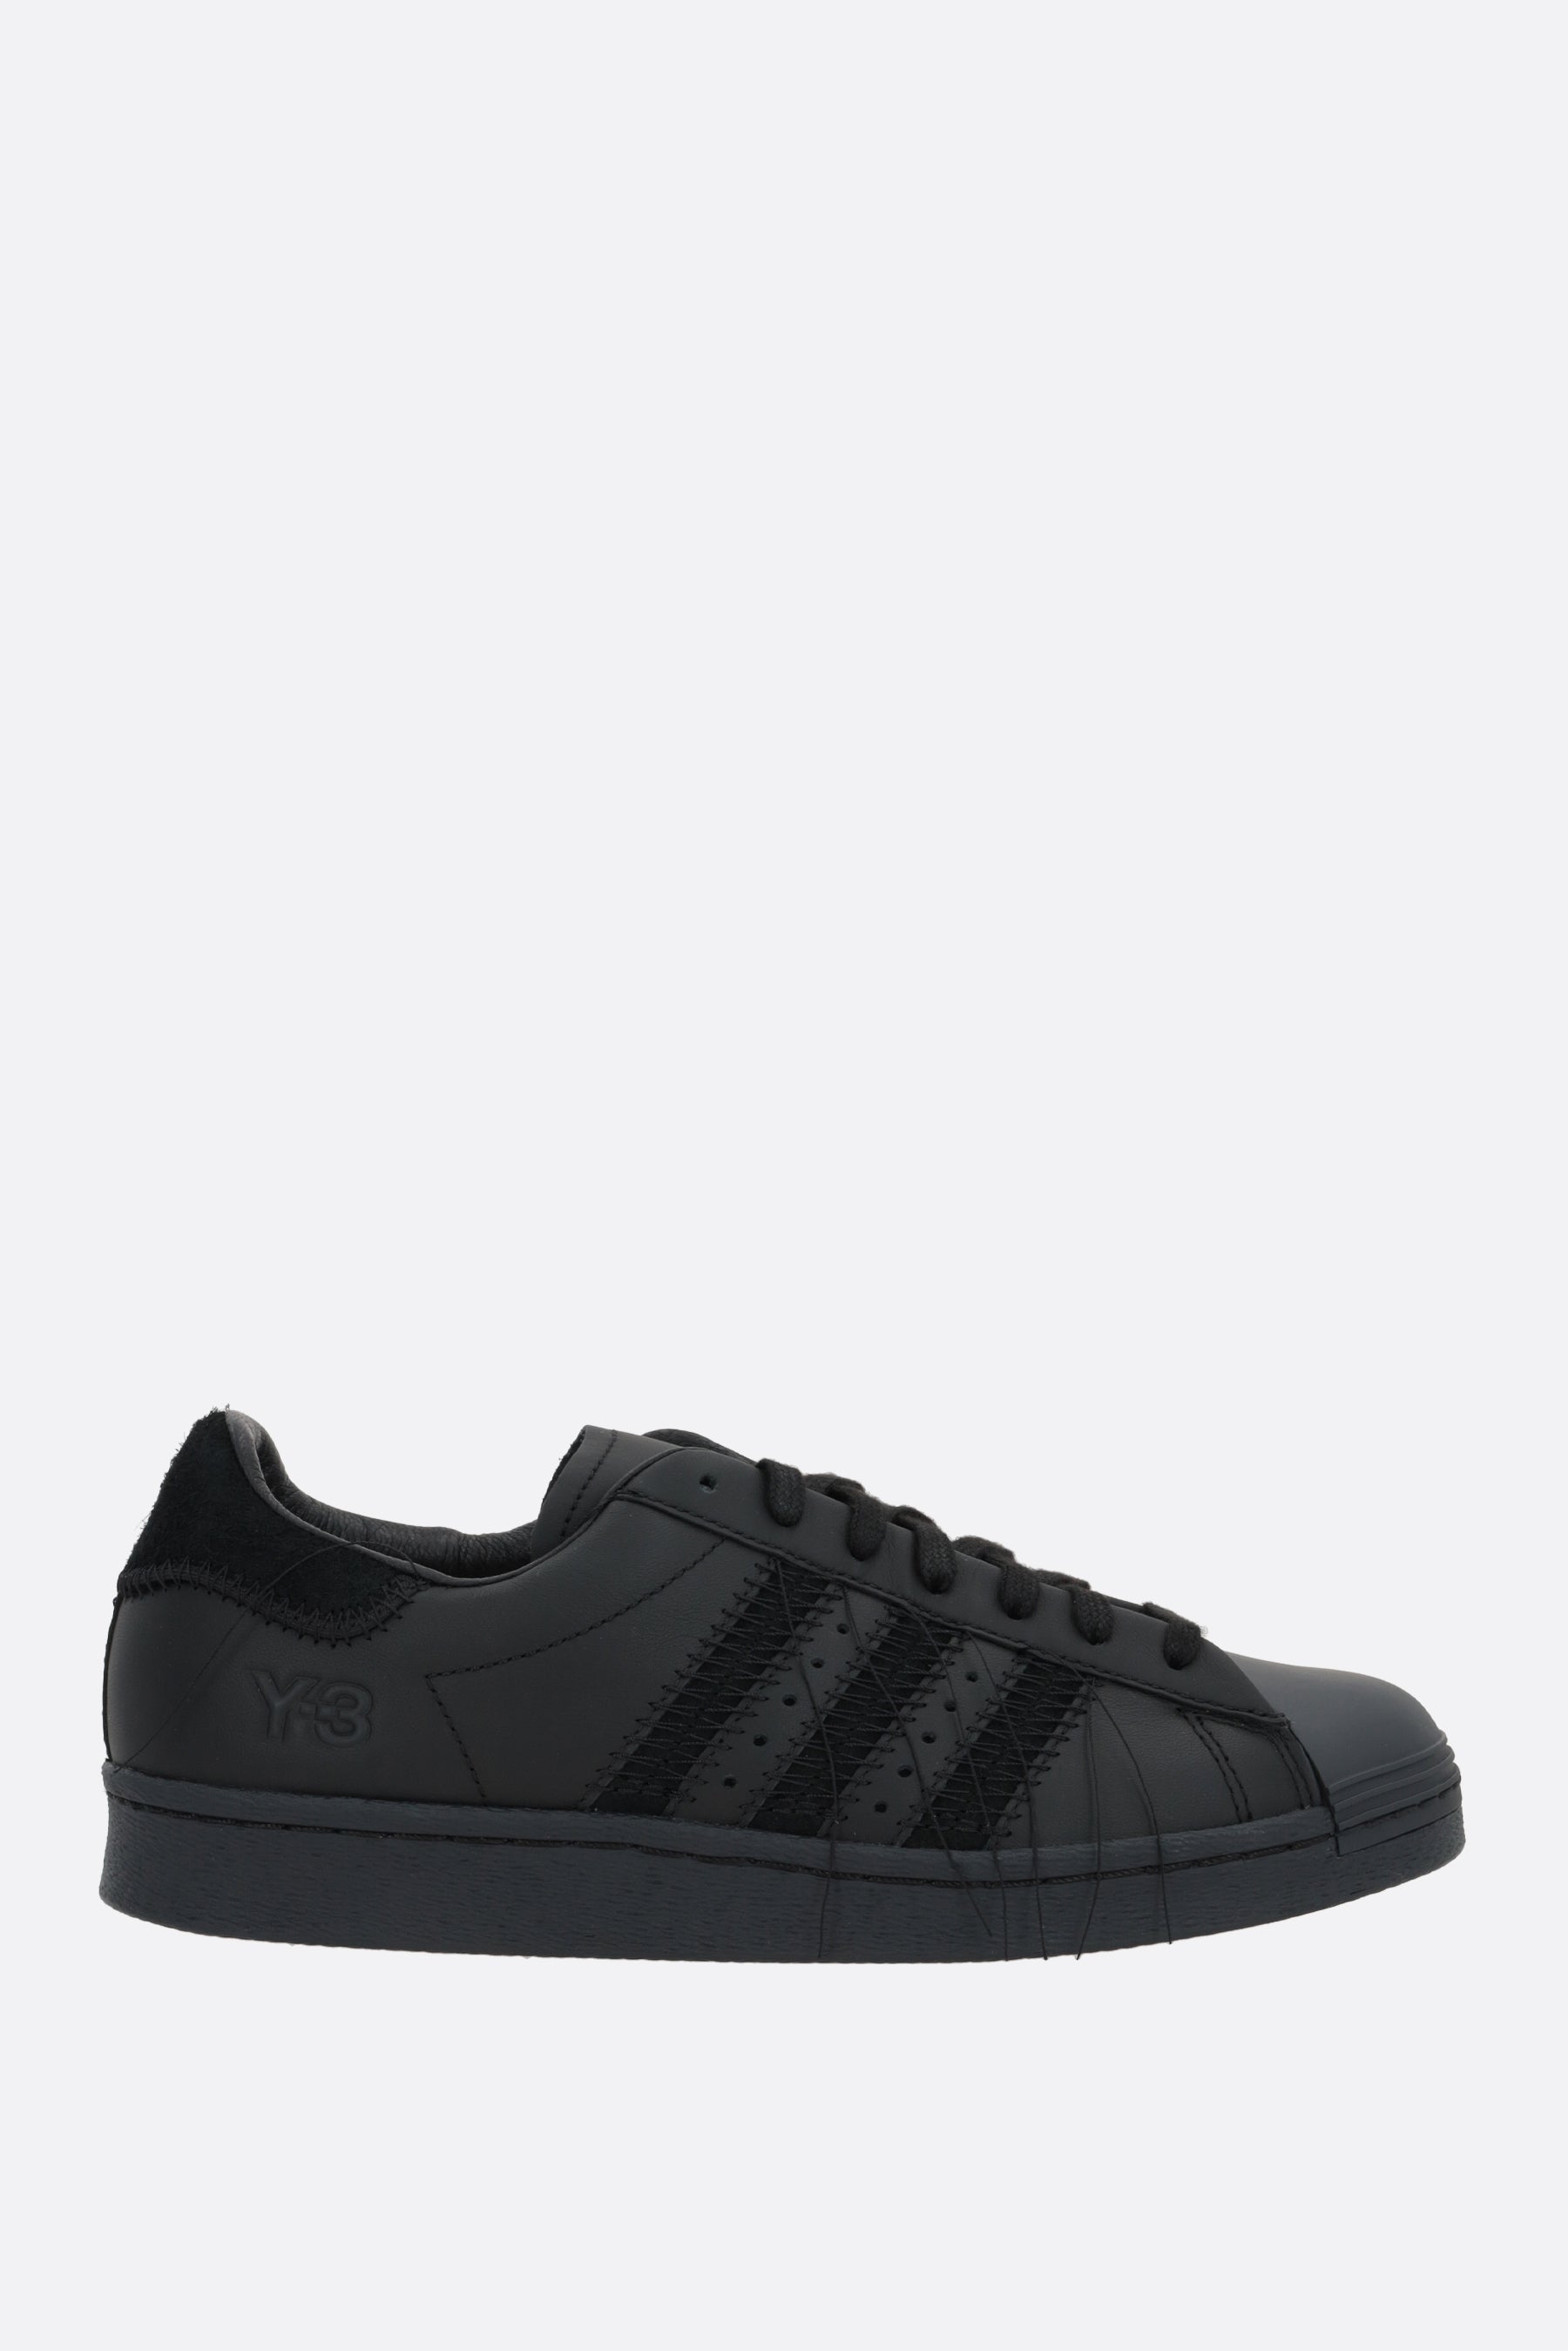 Superstar smooth leather sneakers